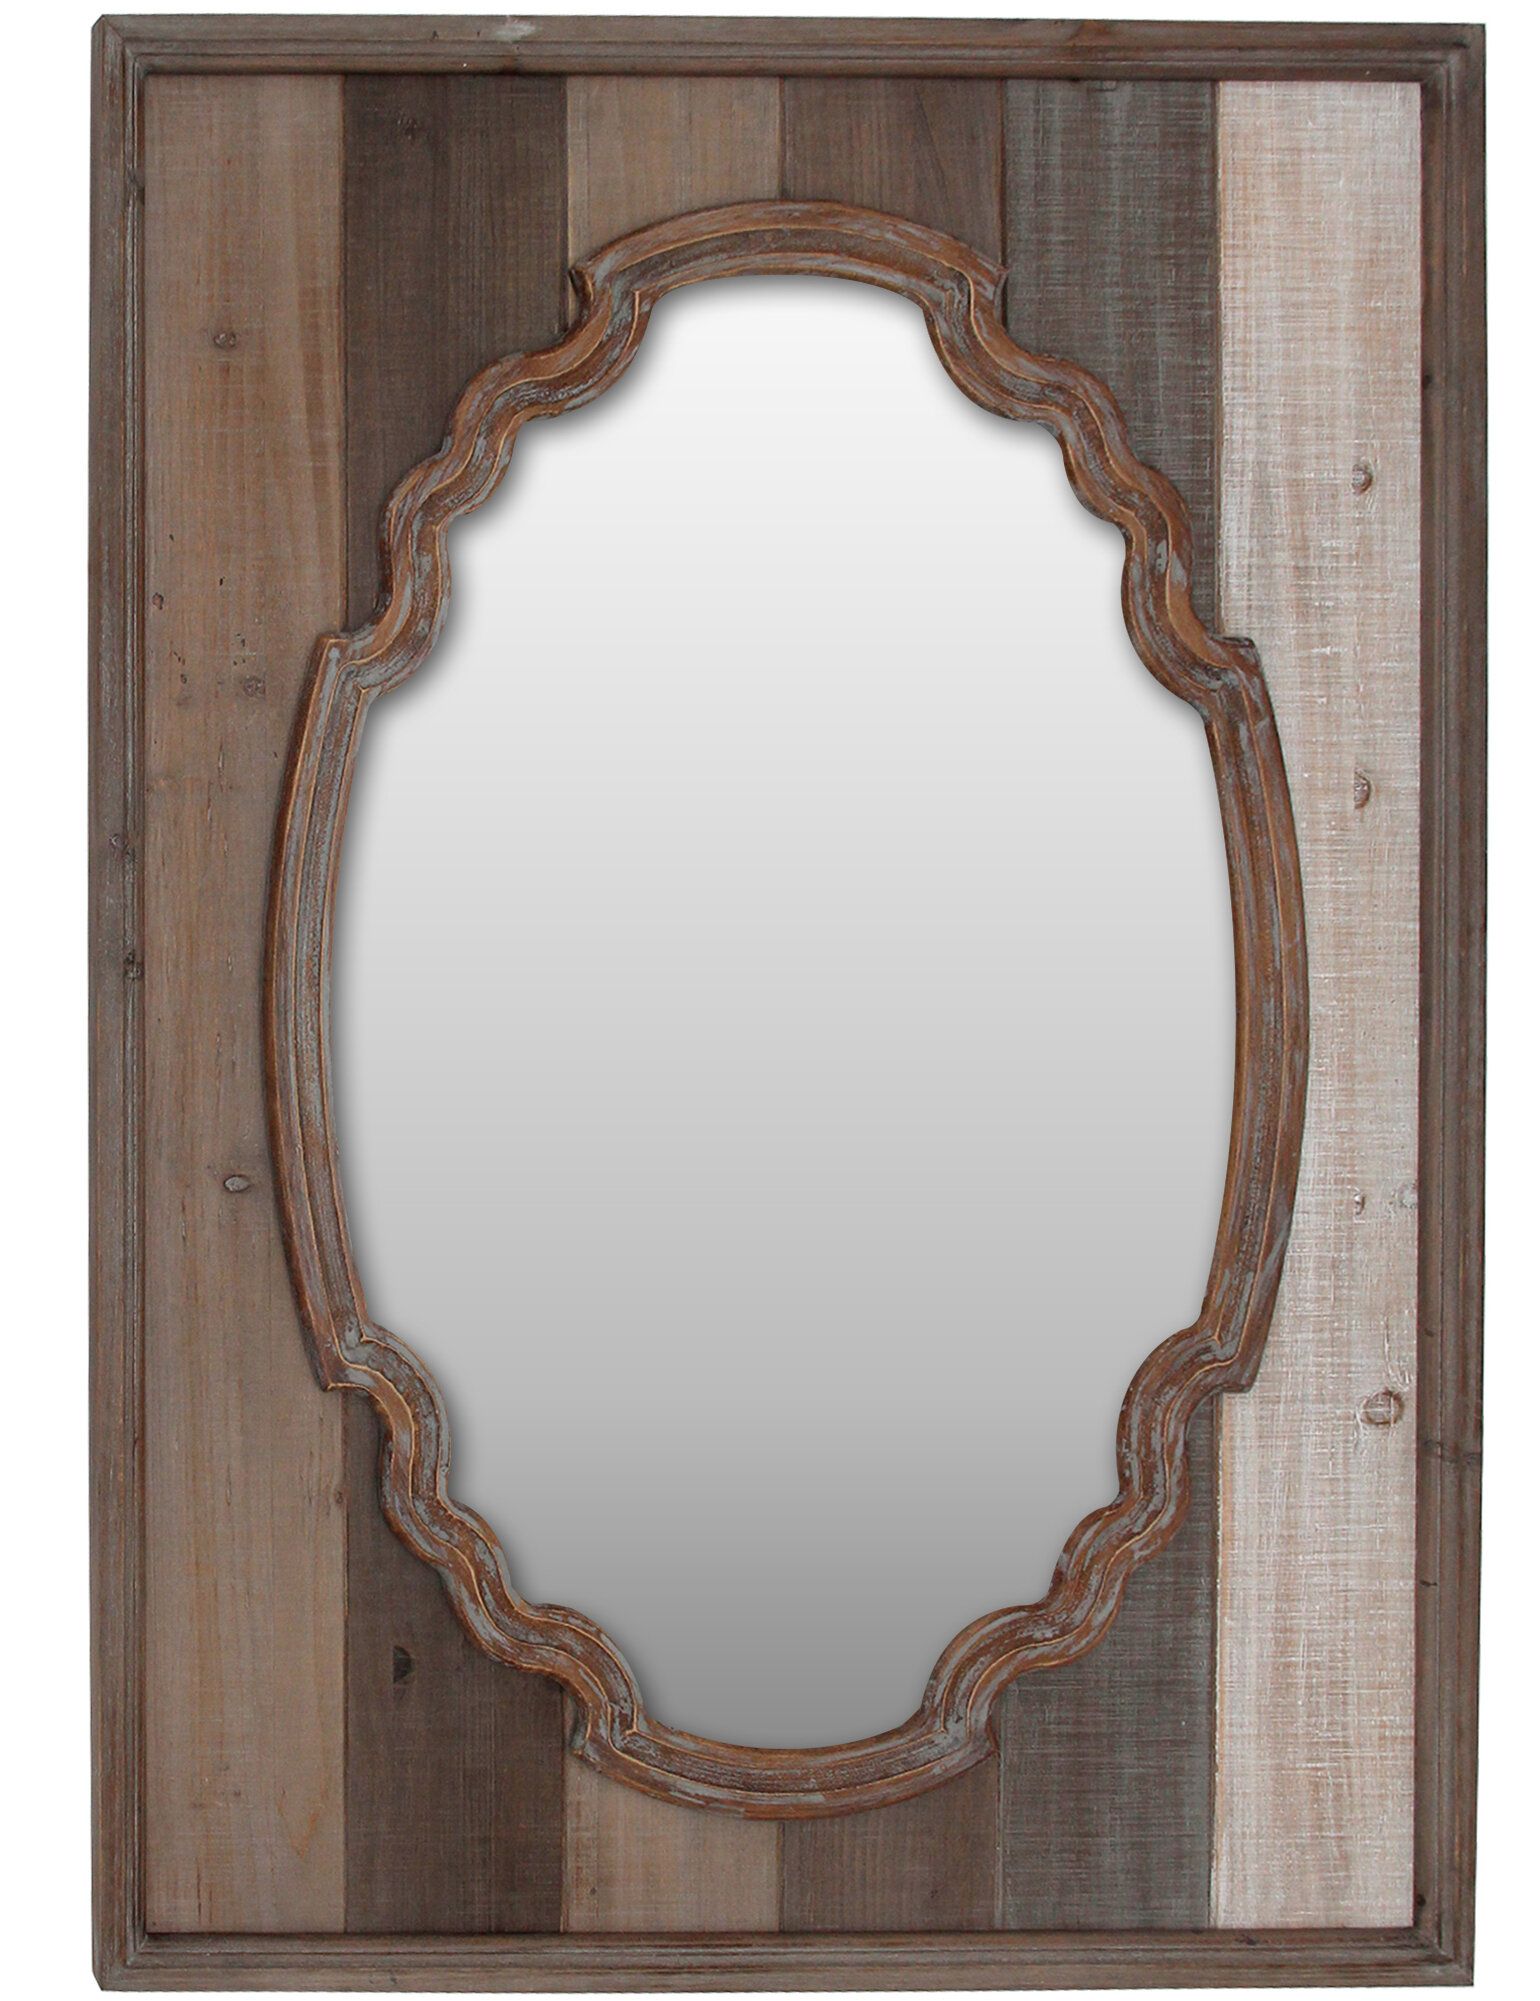 Jaylyn Elegant Farmstead Rustic Accent Mirror In Peetz Modern Rustic Accent Mirrors (View 16 of 20)